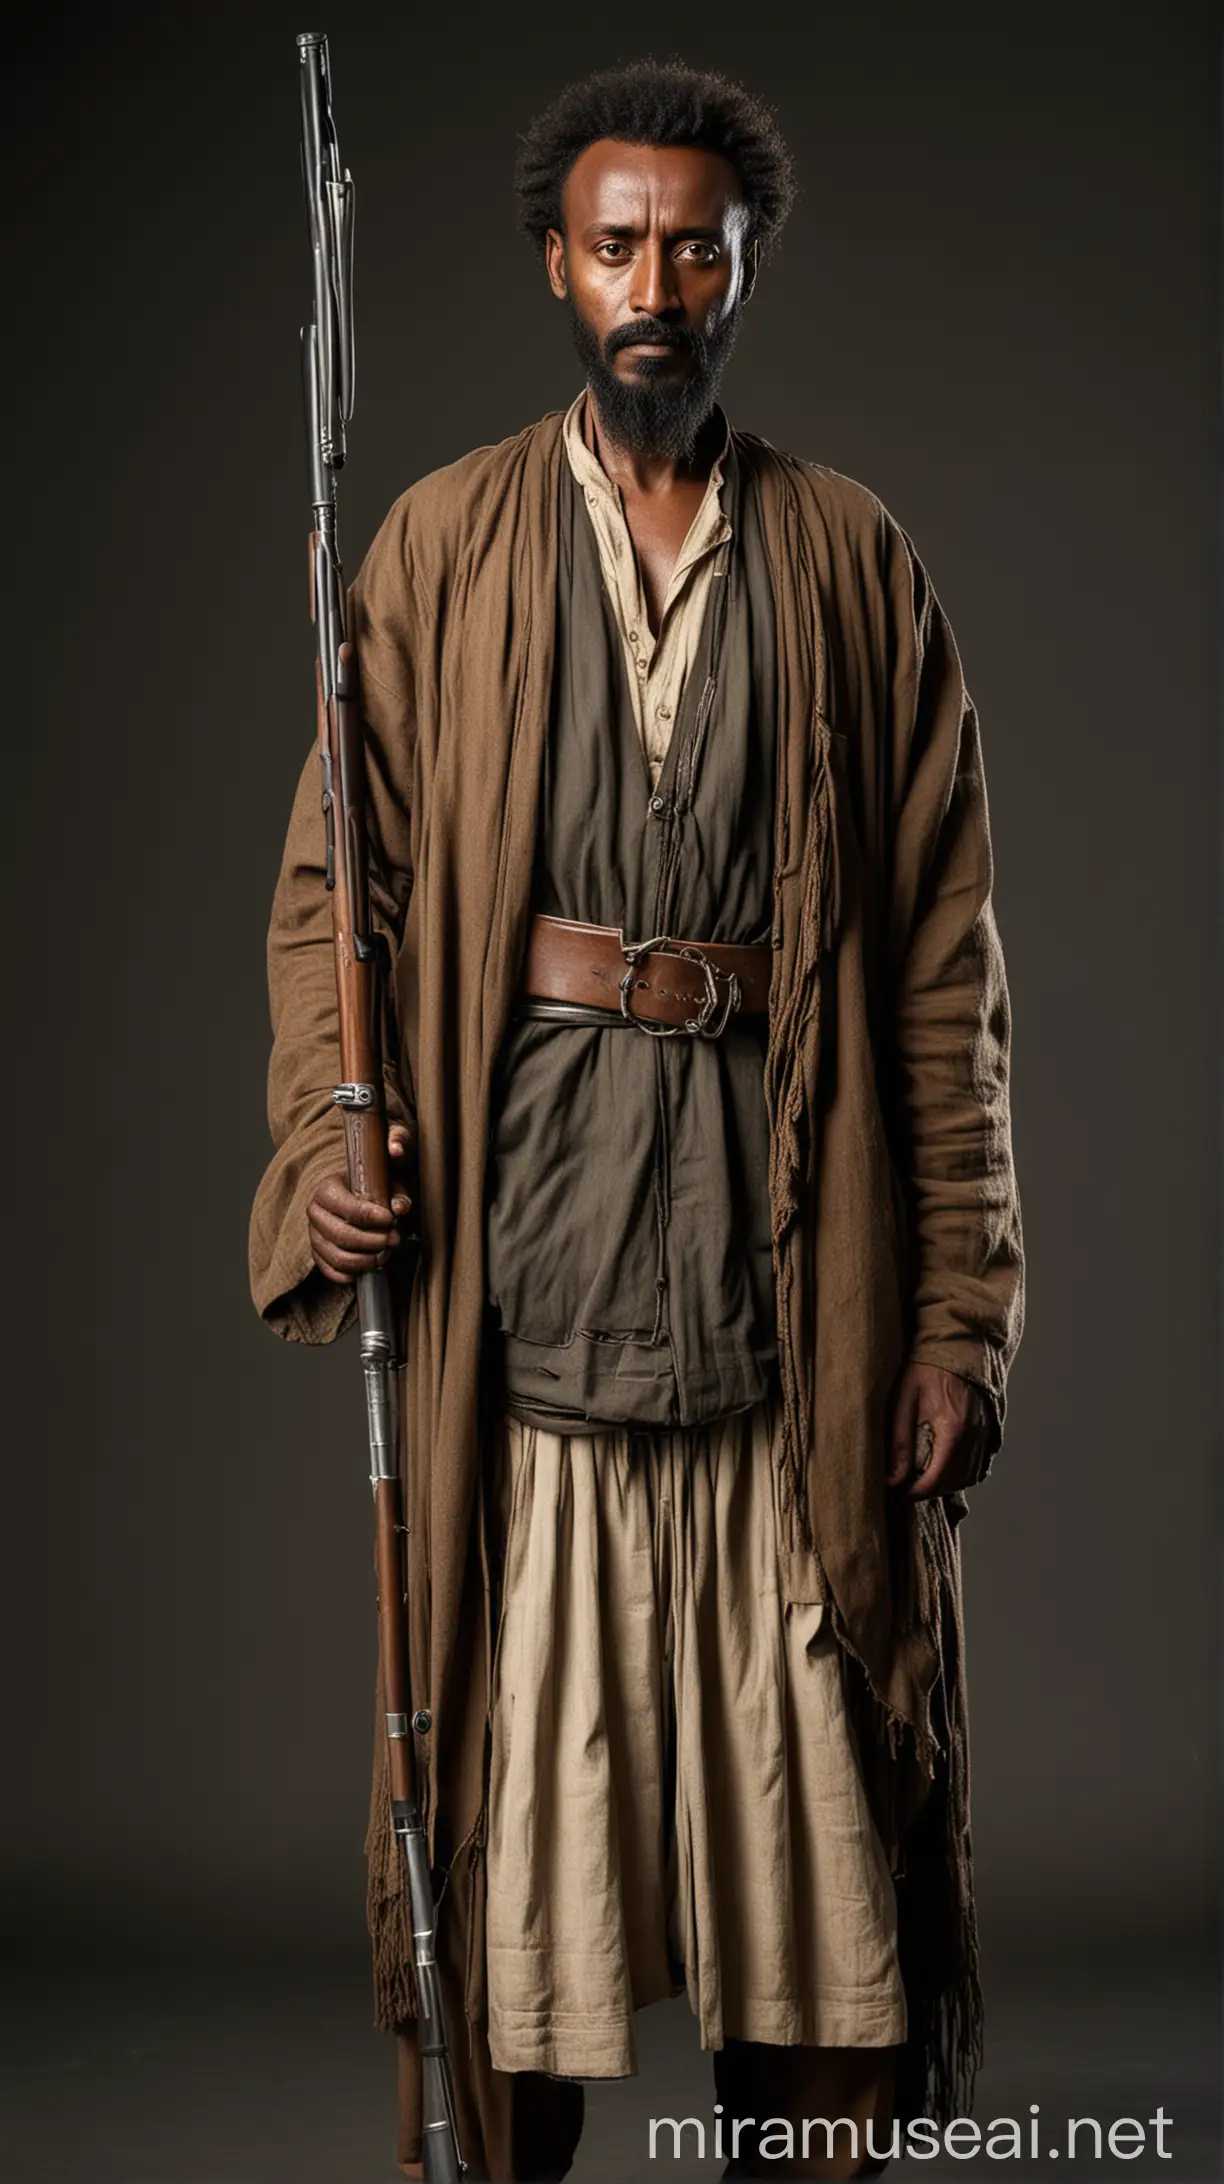 A strong Ethiopian  warrior, ageing,  low cut hair, full face beard, well groomed,  middle aged man, warrior, wearing a long clothing, standing with a rifle, very dark skin, full portrait 